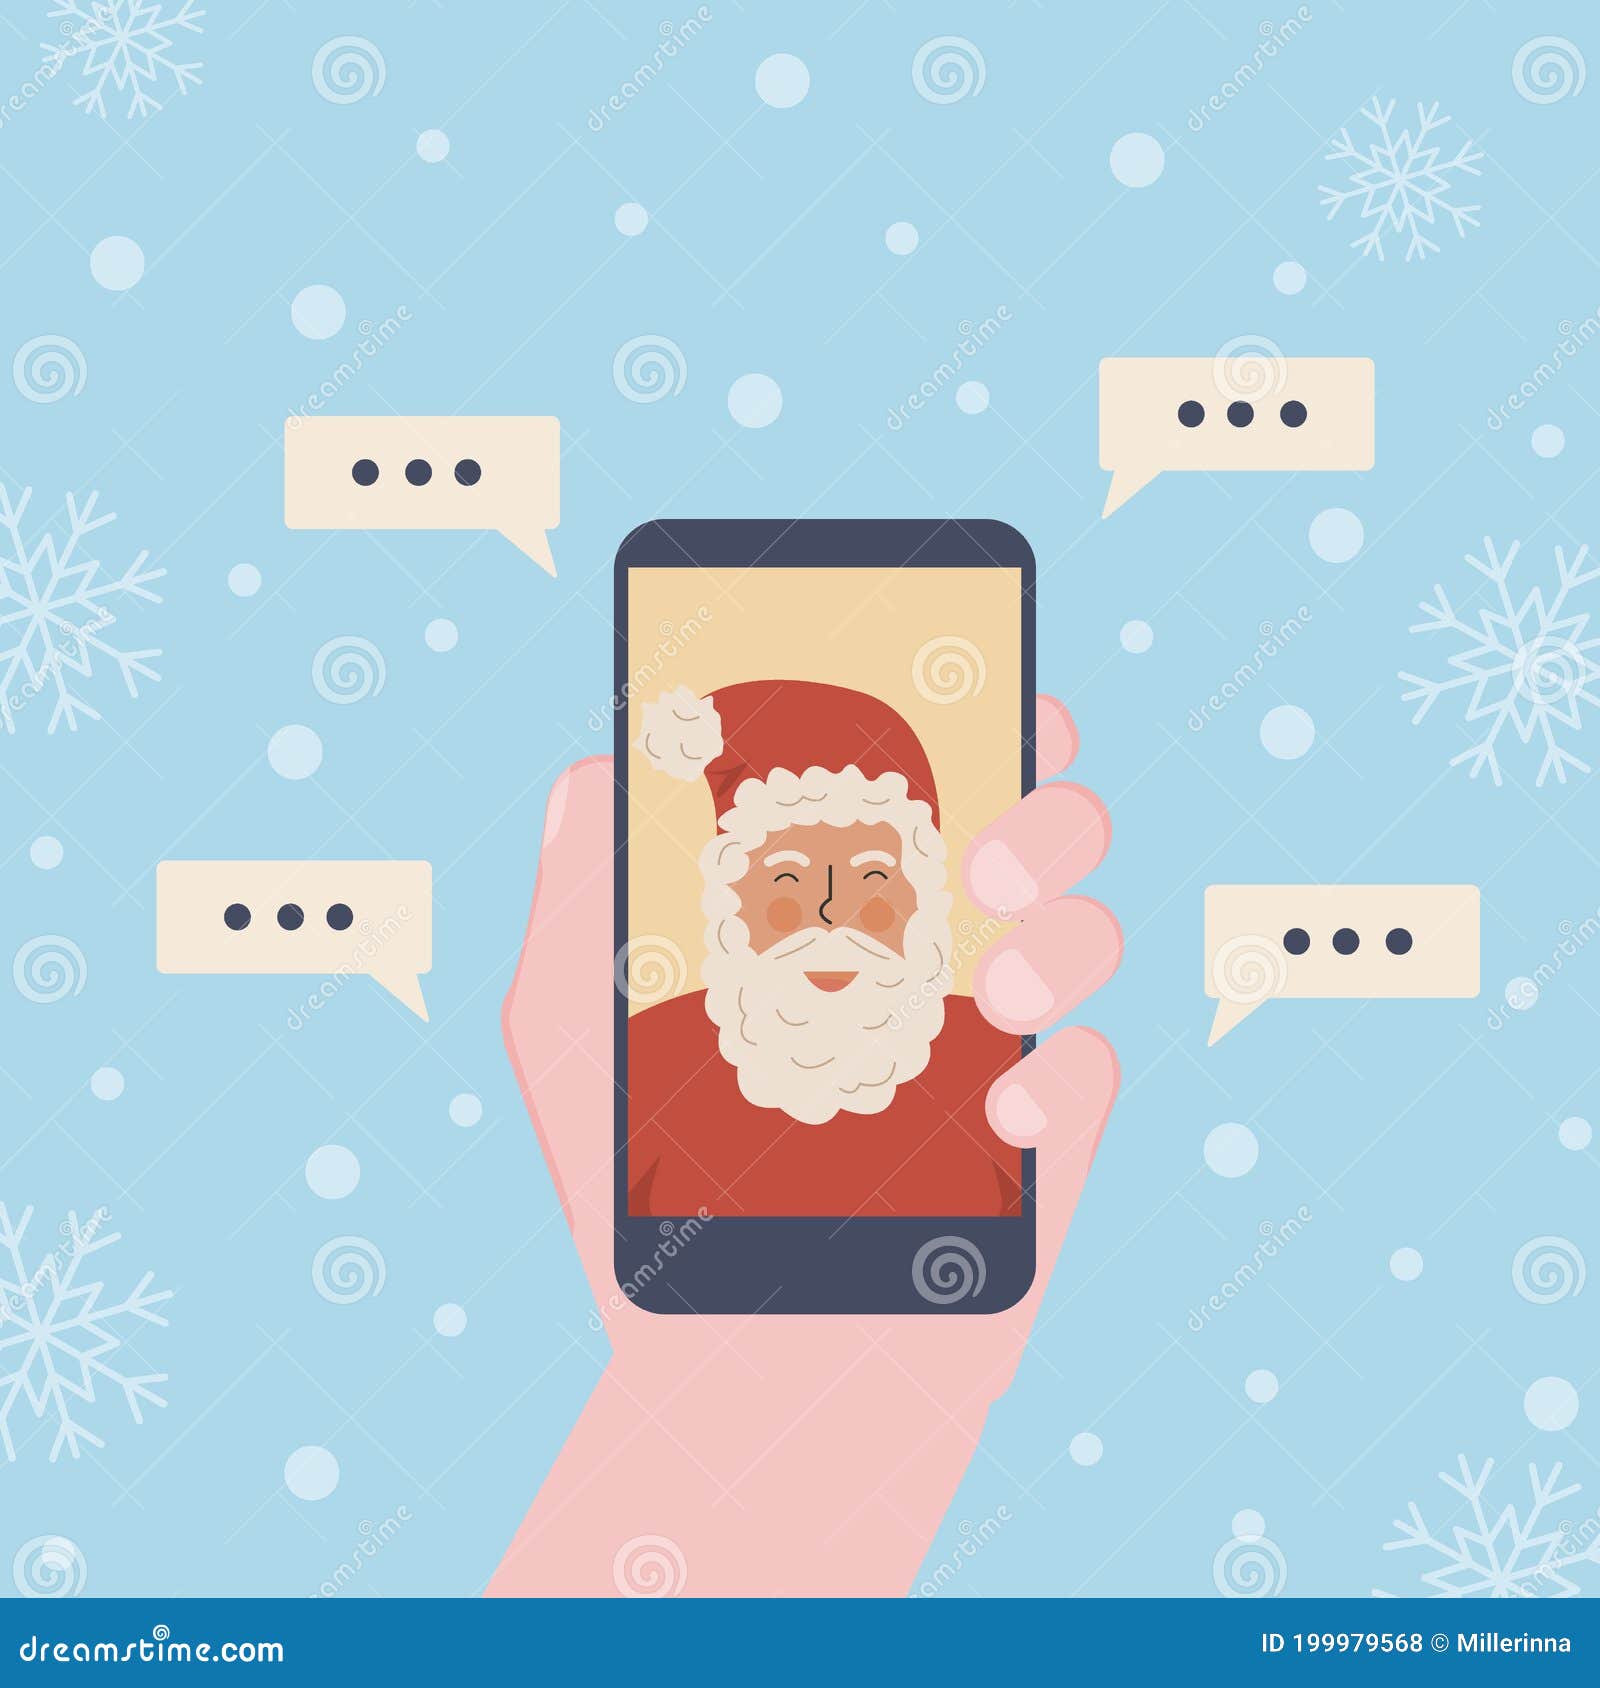 Kid Making Video Call with Santa Claus during Xmas. Hand Holding ...